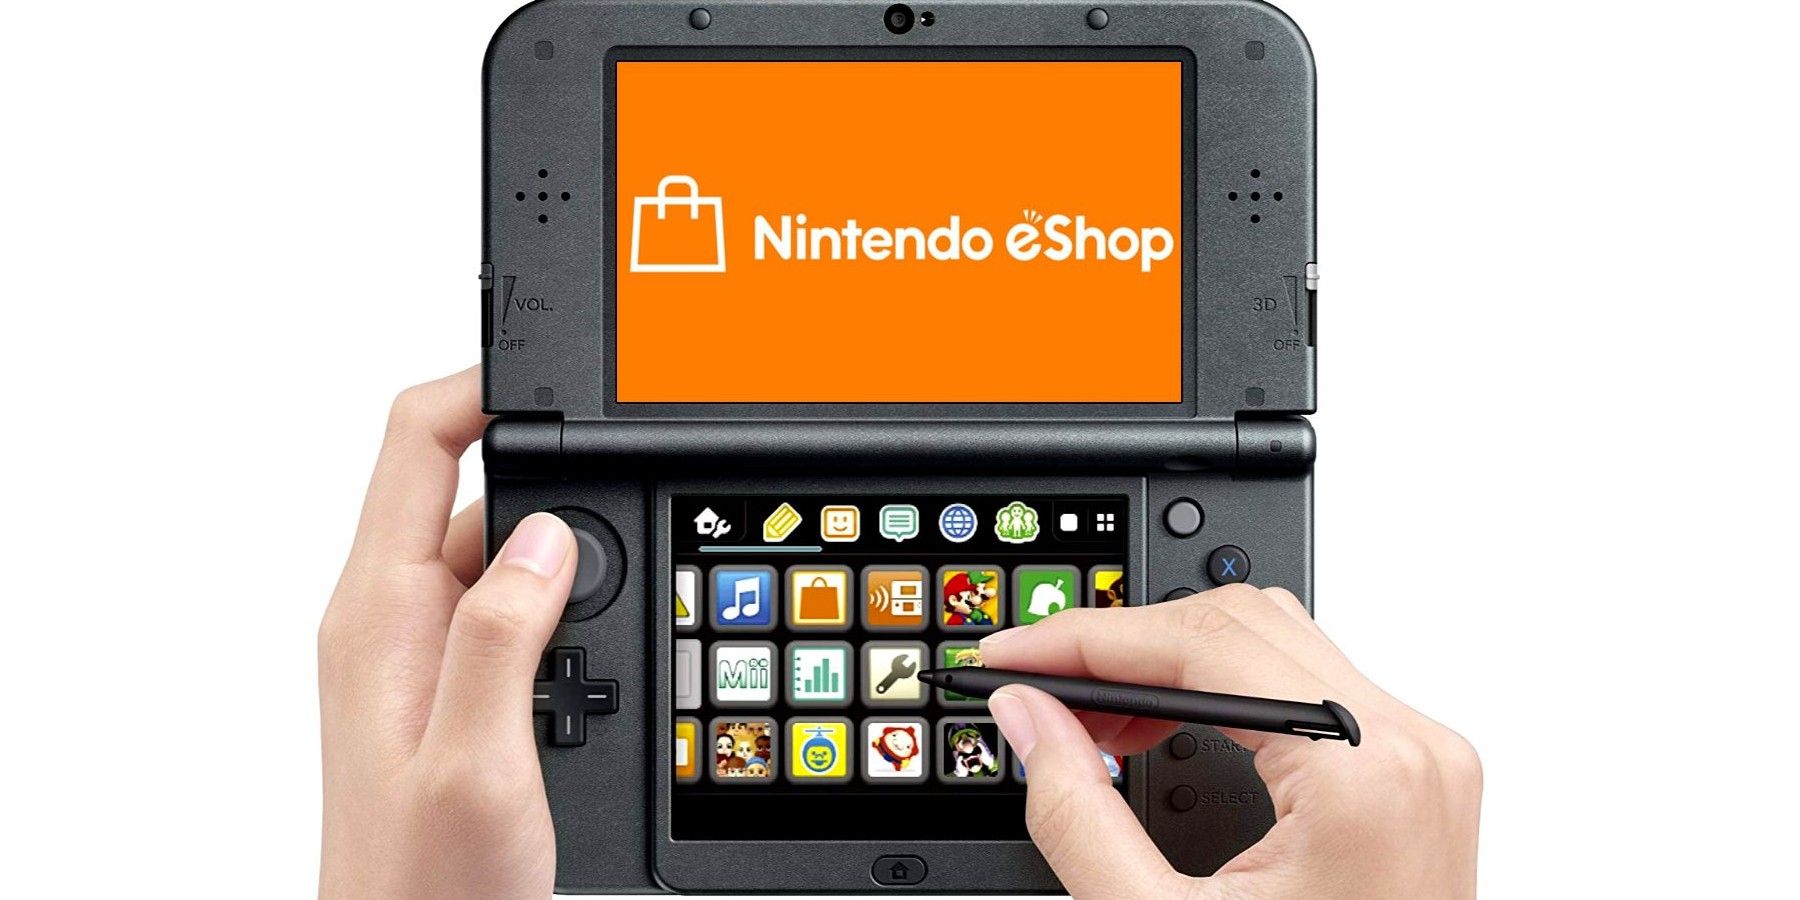 Nintendo Is Closing The 3DS & Wii U eShops And Has No Plans To